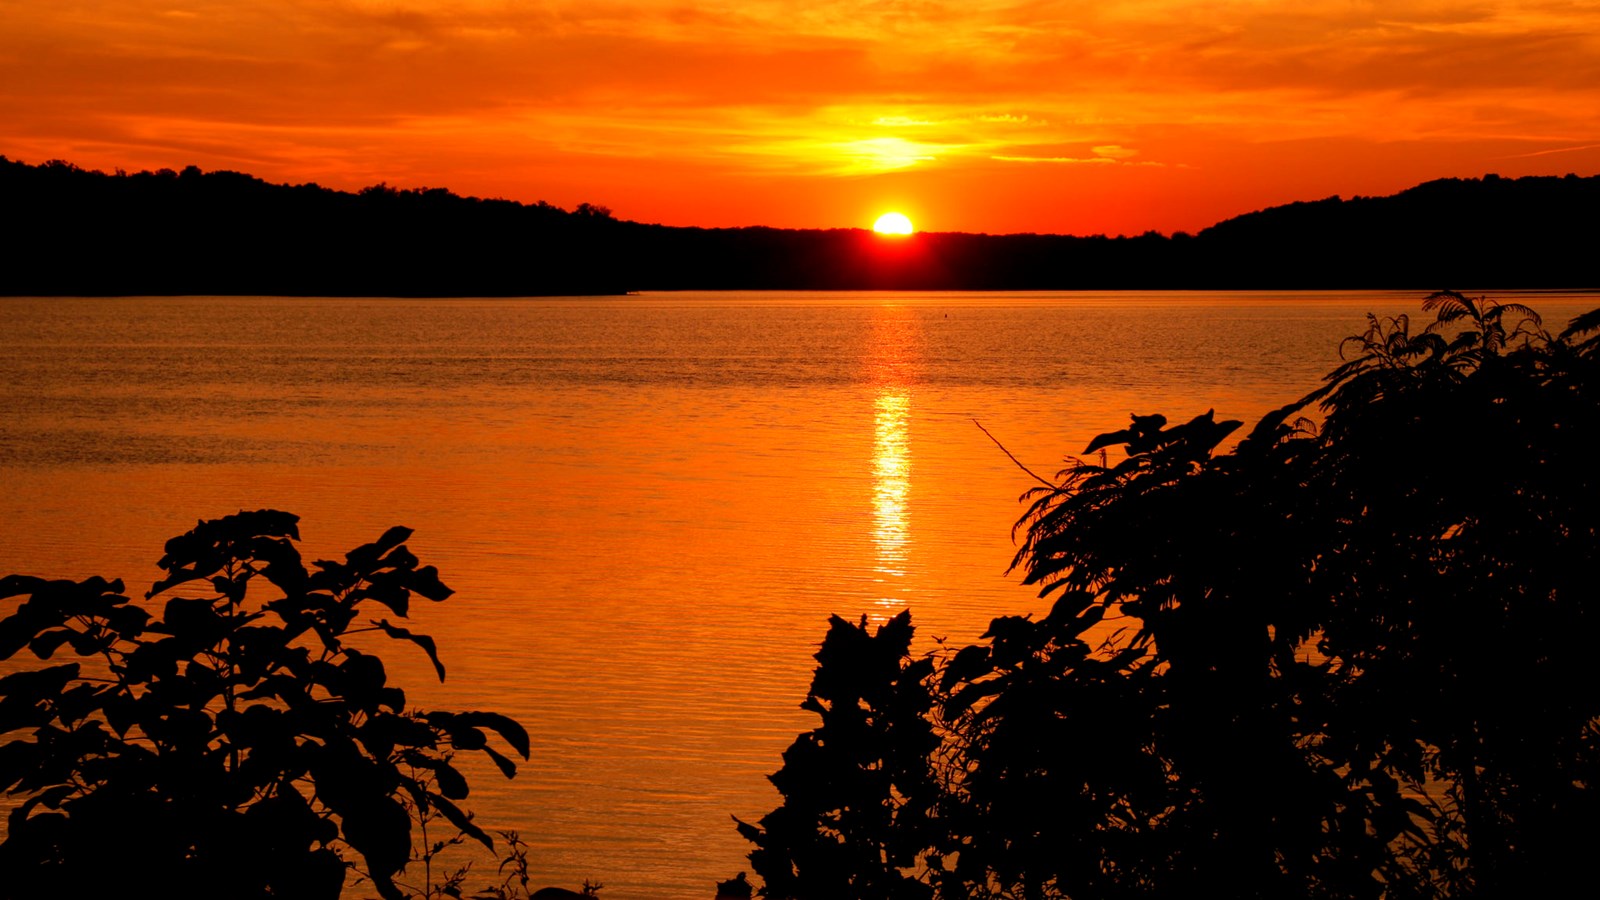 The sun dips behnd a silhouette of rolling hills, turning the lake and sky a brilliant orange.